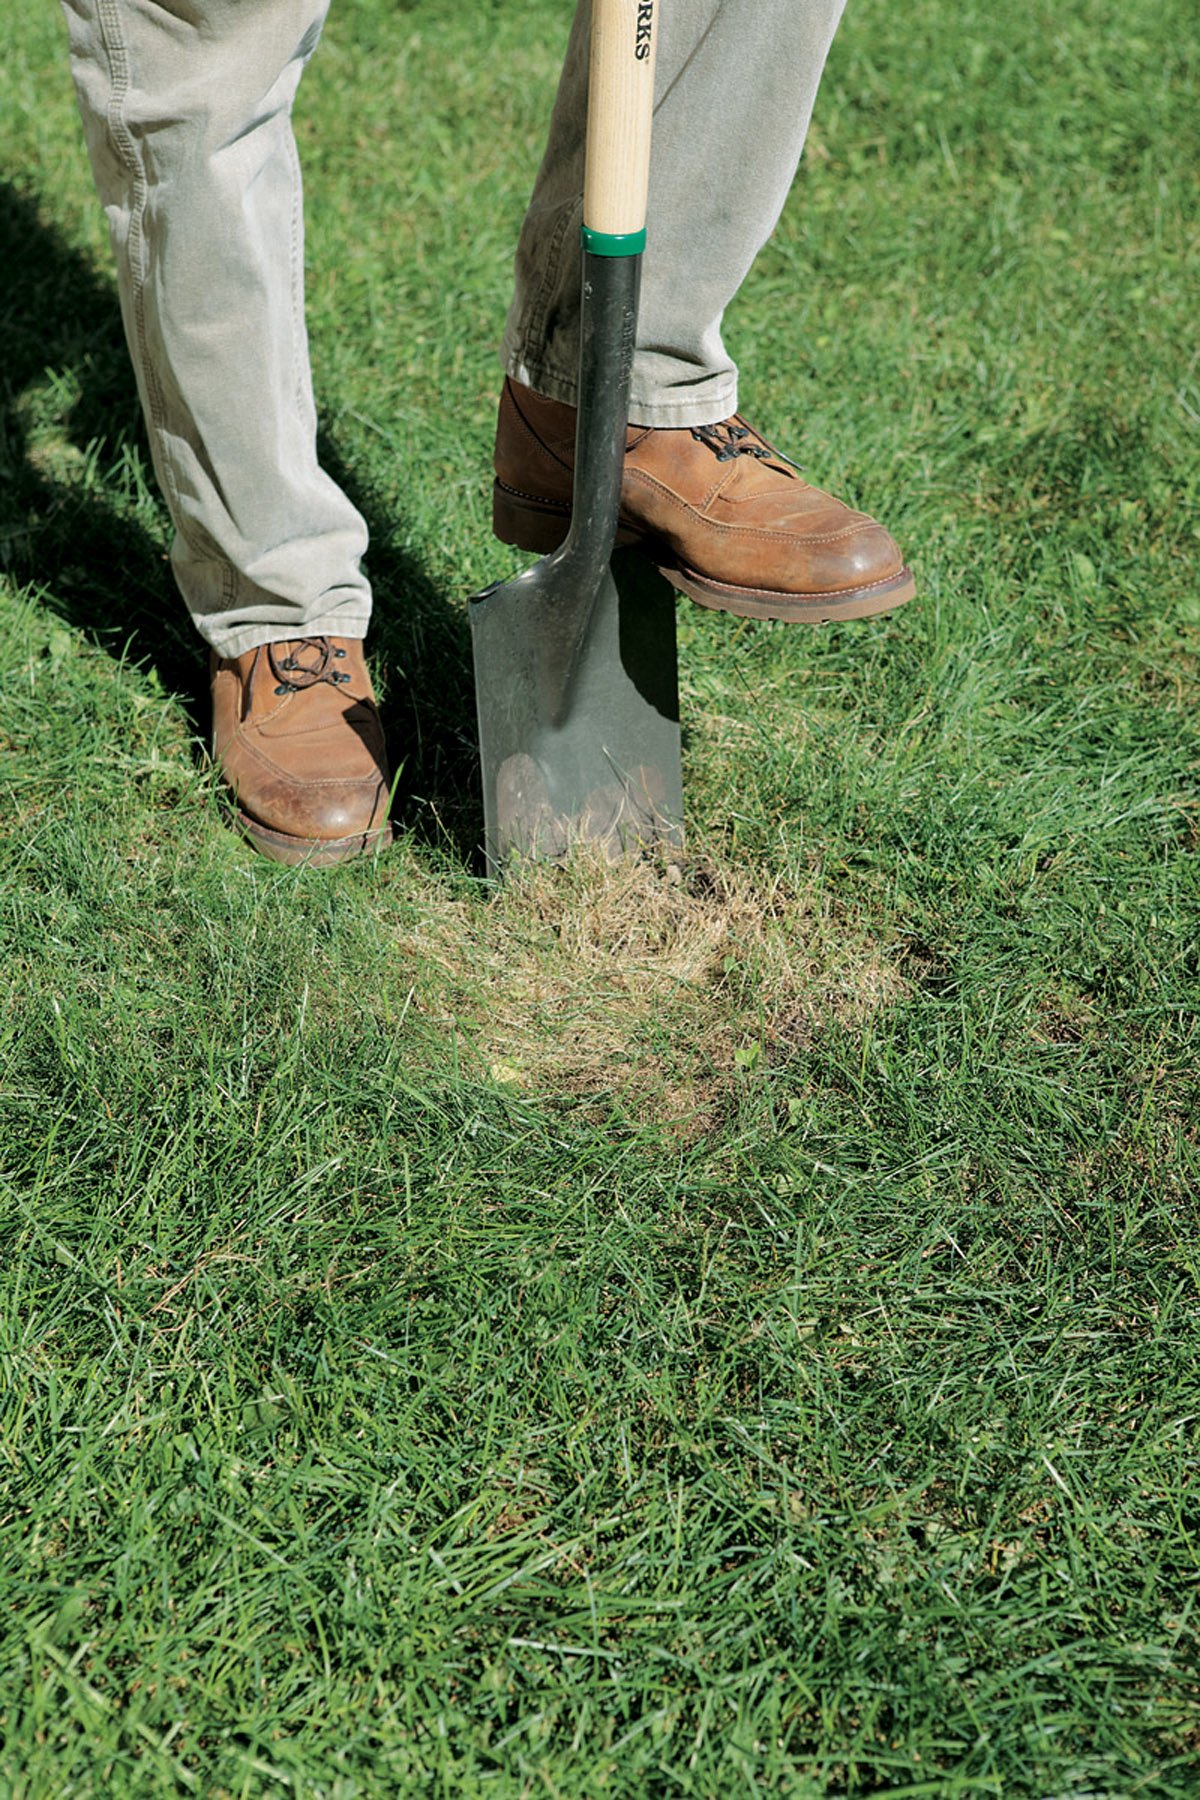 Repairing Bare Spots in Your Lawn With Sod